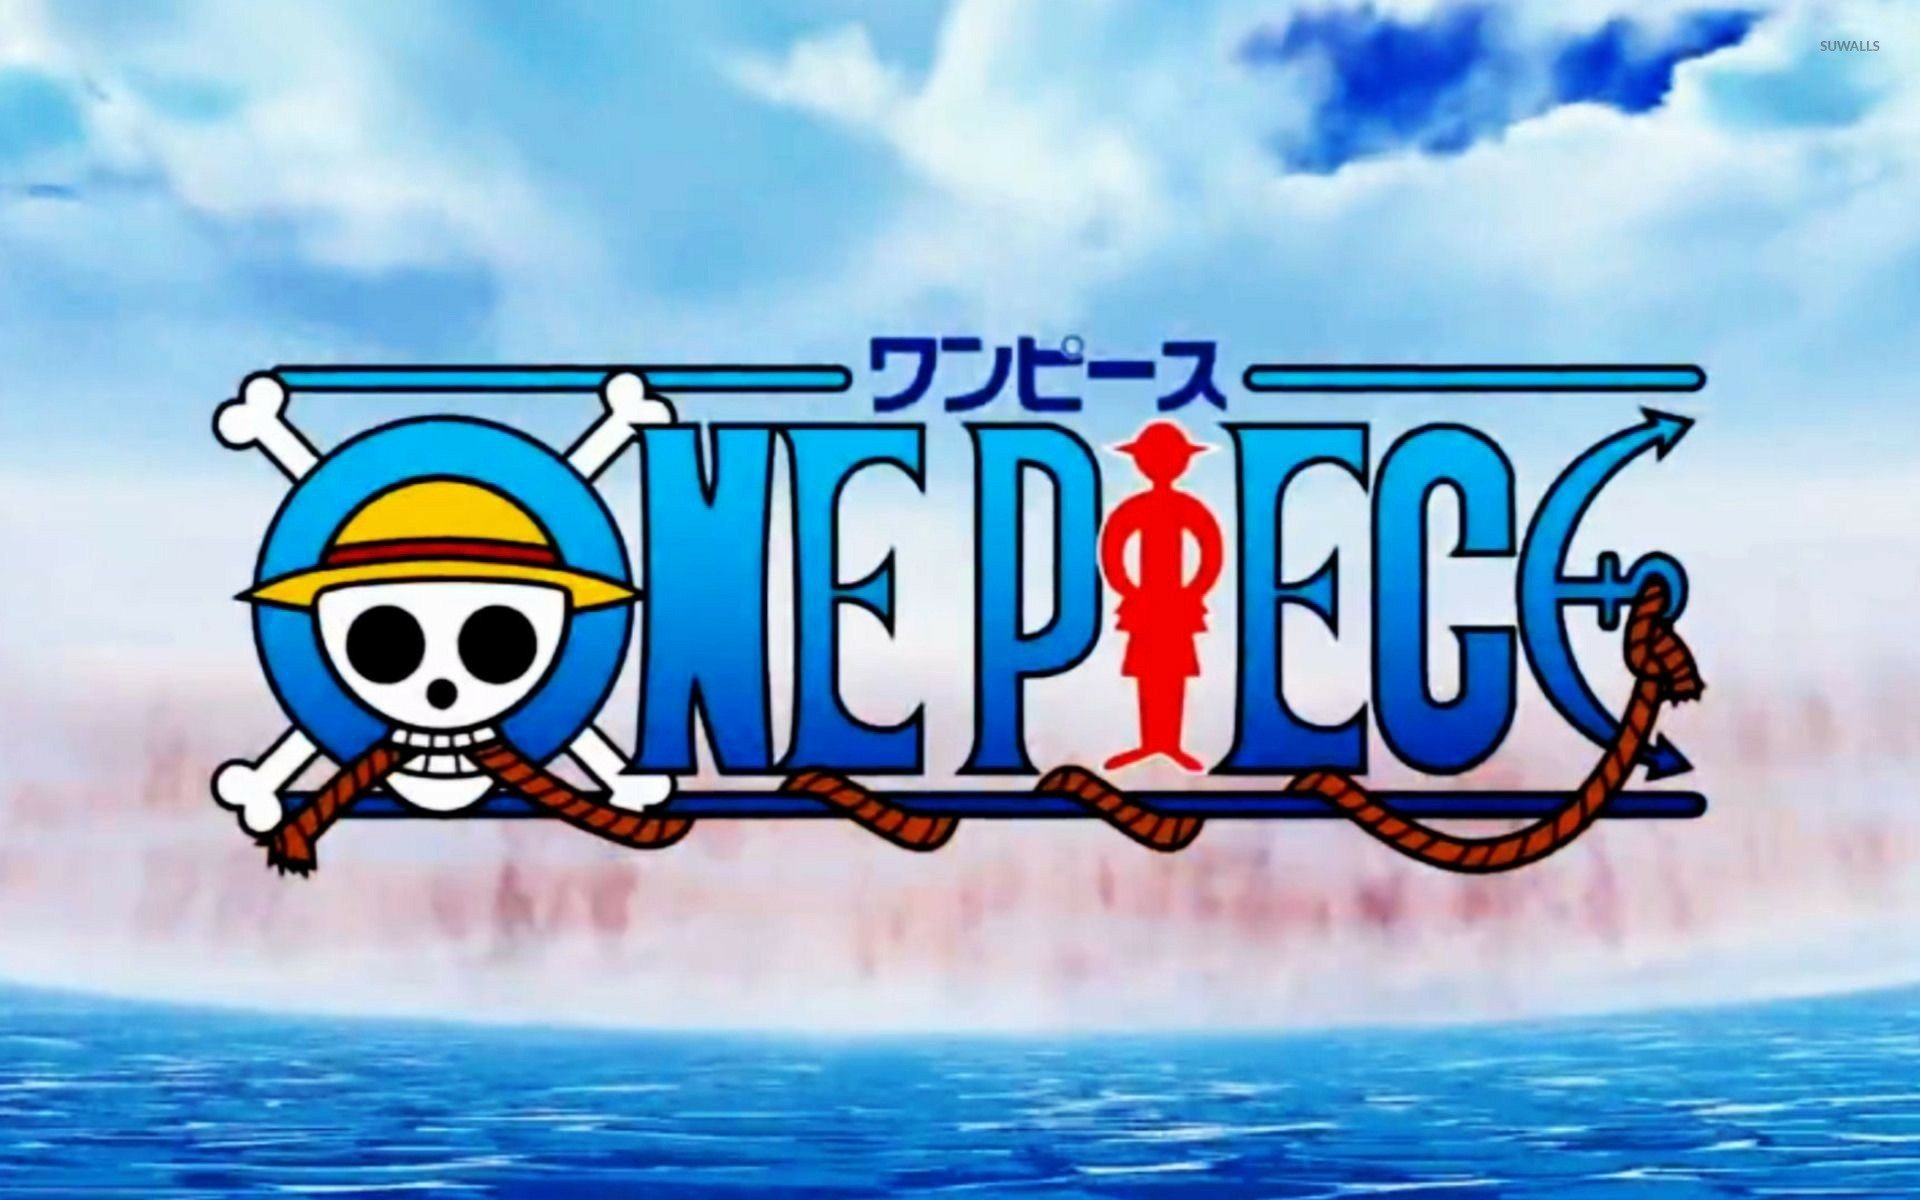 One Piece Logo Hd Wallpaper Background Image 19x10 Id 8593 Wallpaper Abyss